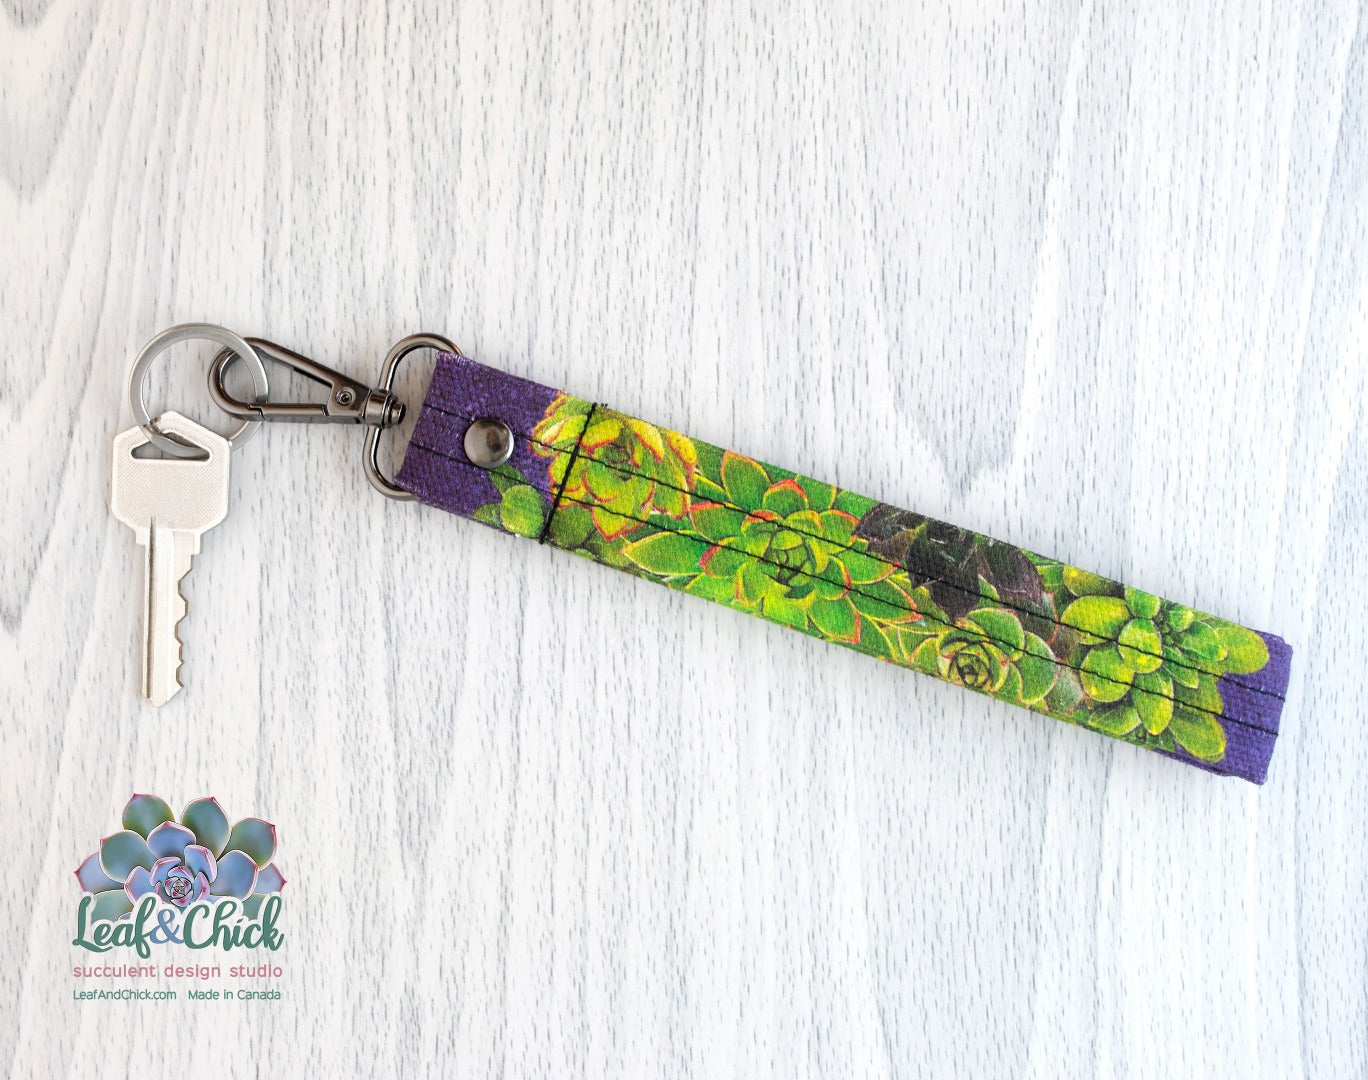 purple and green succulent key fob wristlets are handy to keep your keys and access cards together